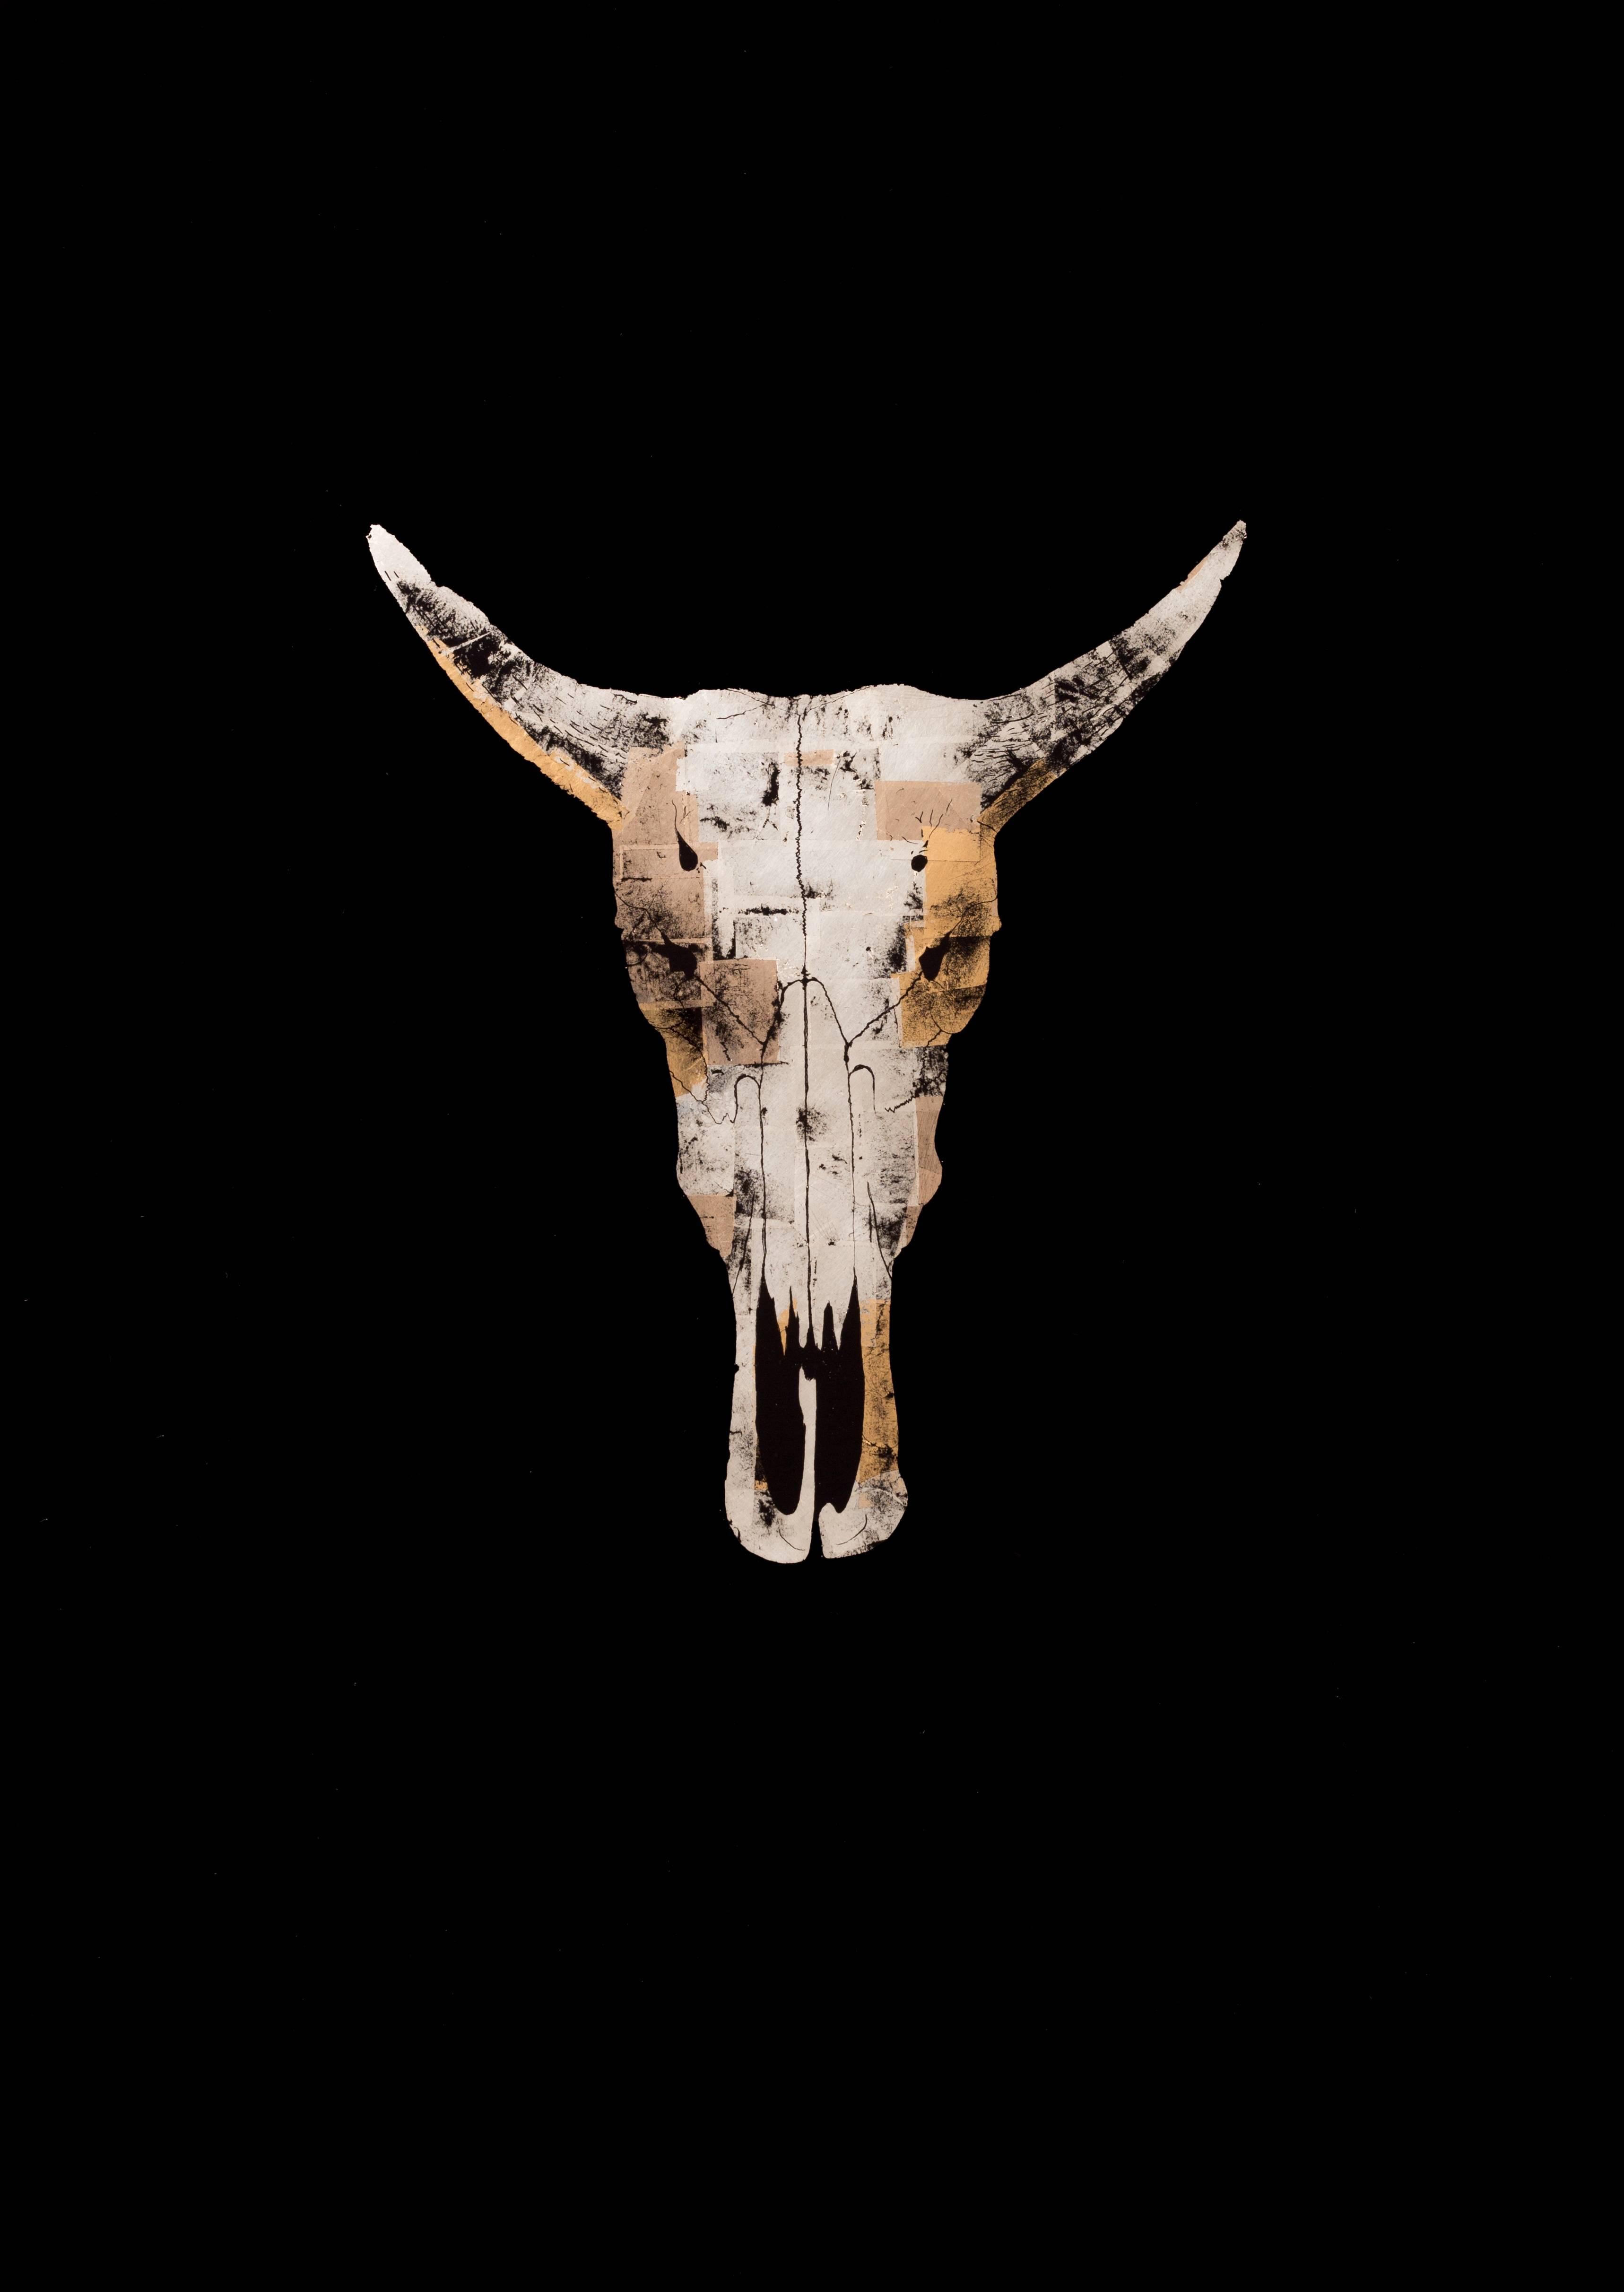 Skull and horns in gold leaf on black glass, using the Verre églomisé technique, by Julian Brooker.